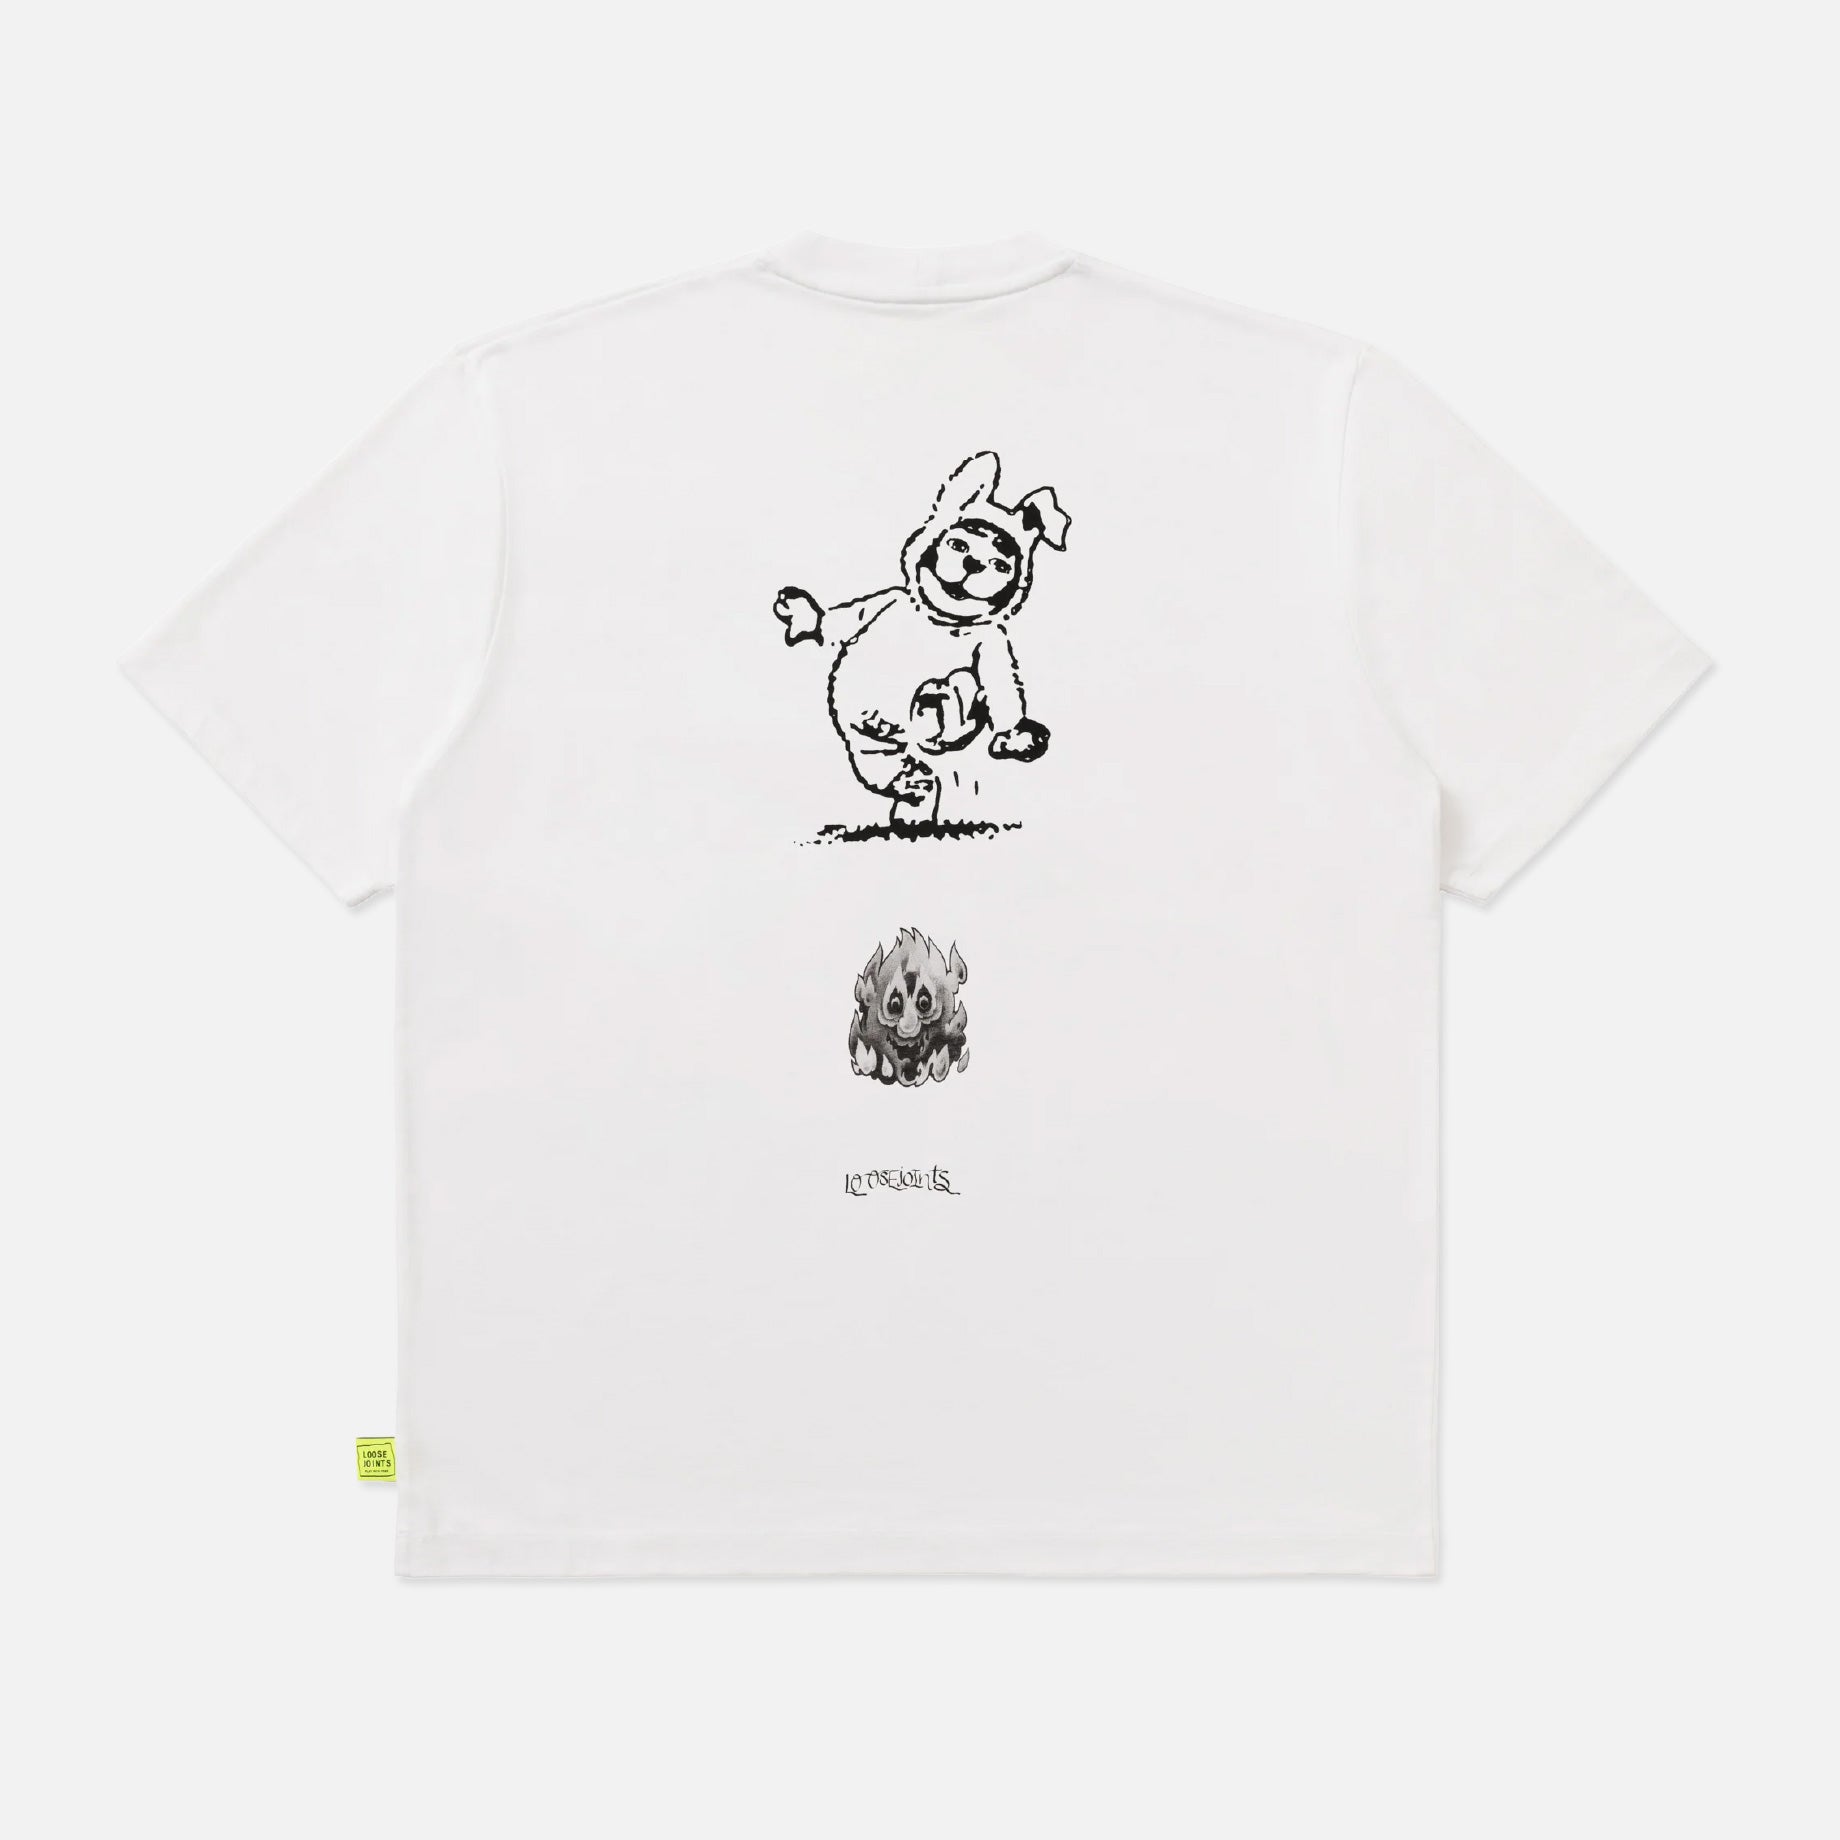 KENSEI YABUNO - 'ONLY LOVE CAN BREAK YOUR HEART' S/S TEE（WHITE）